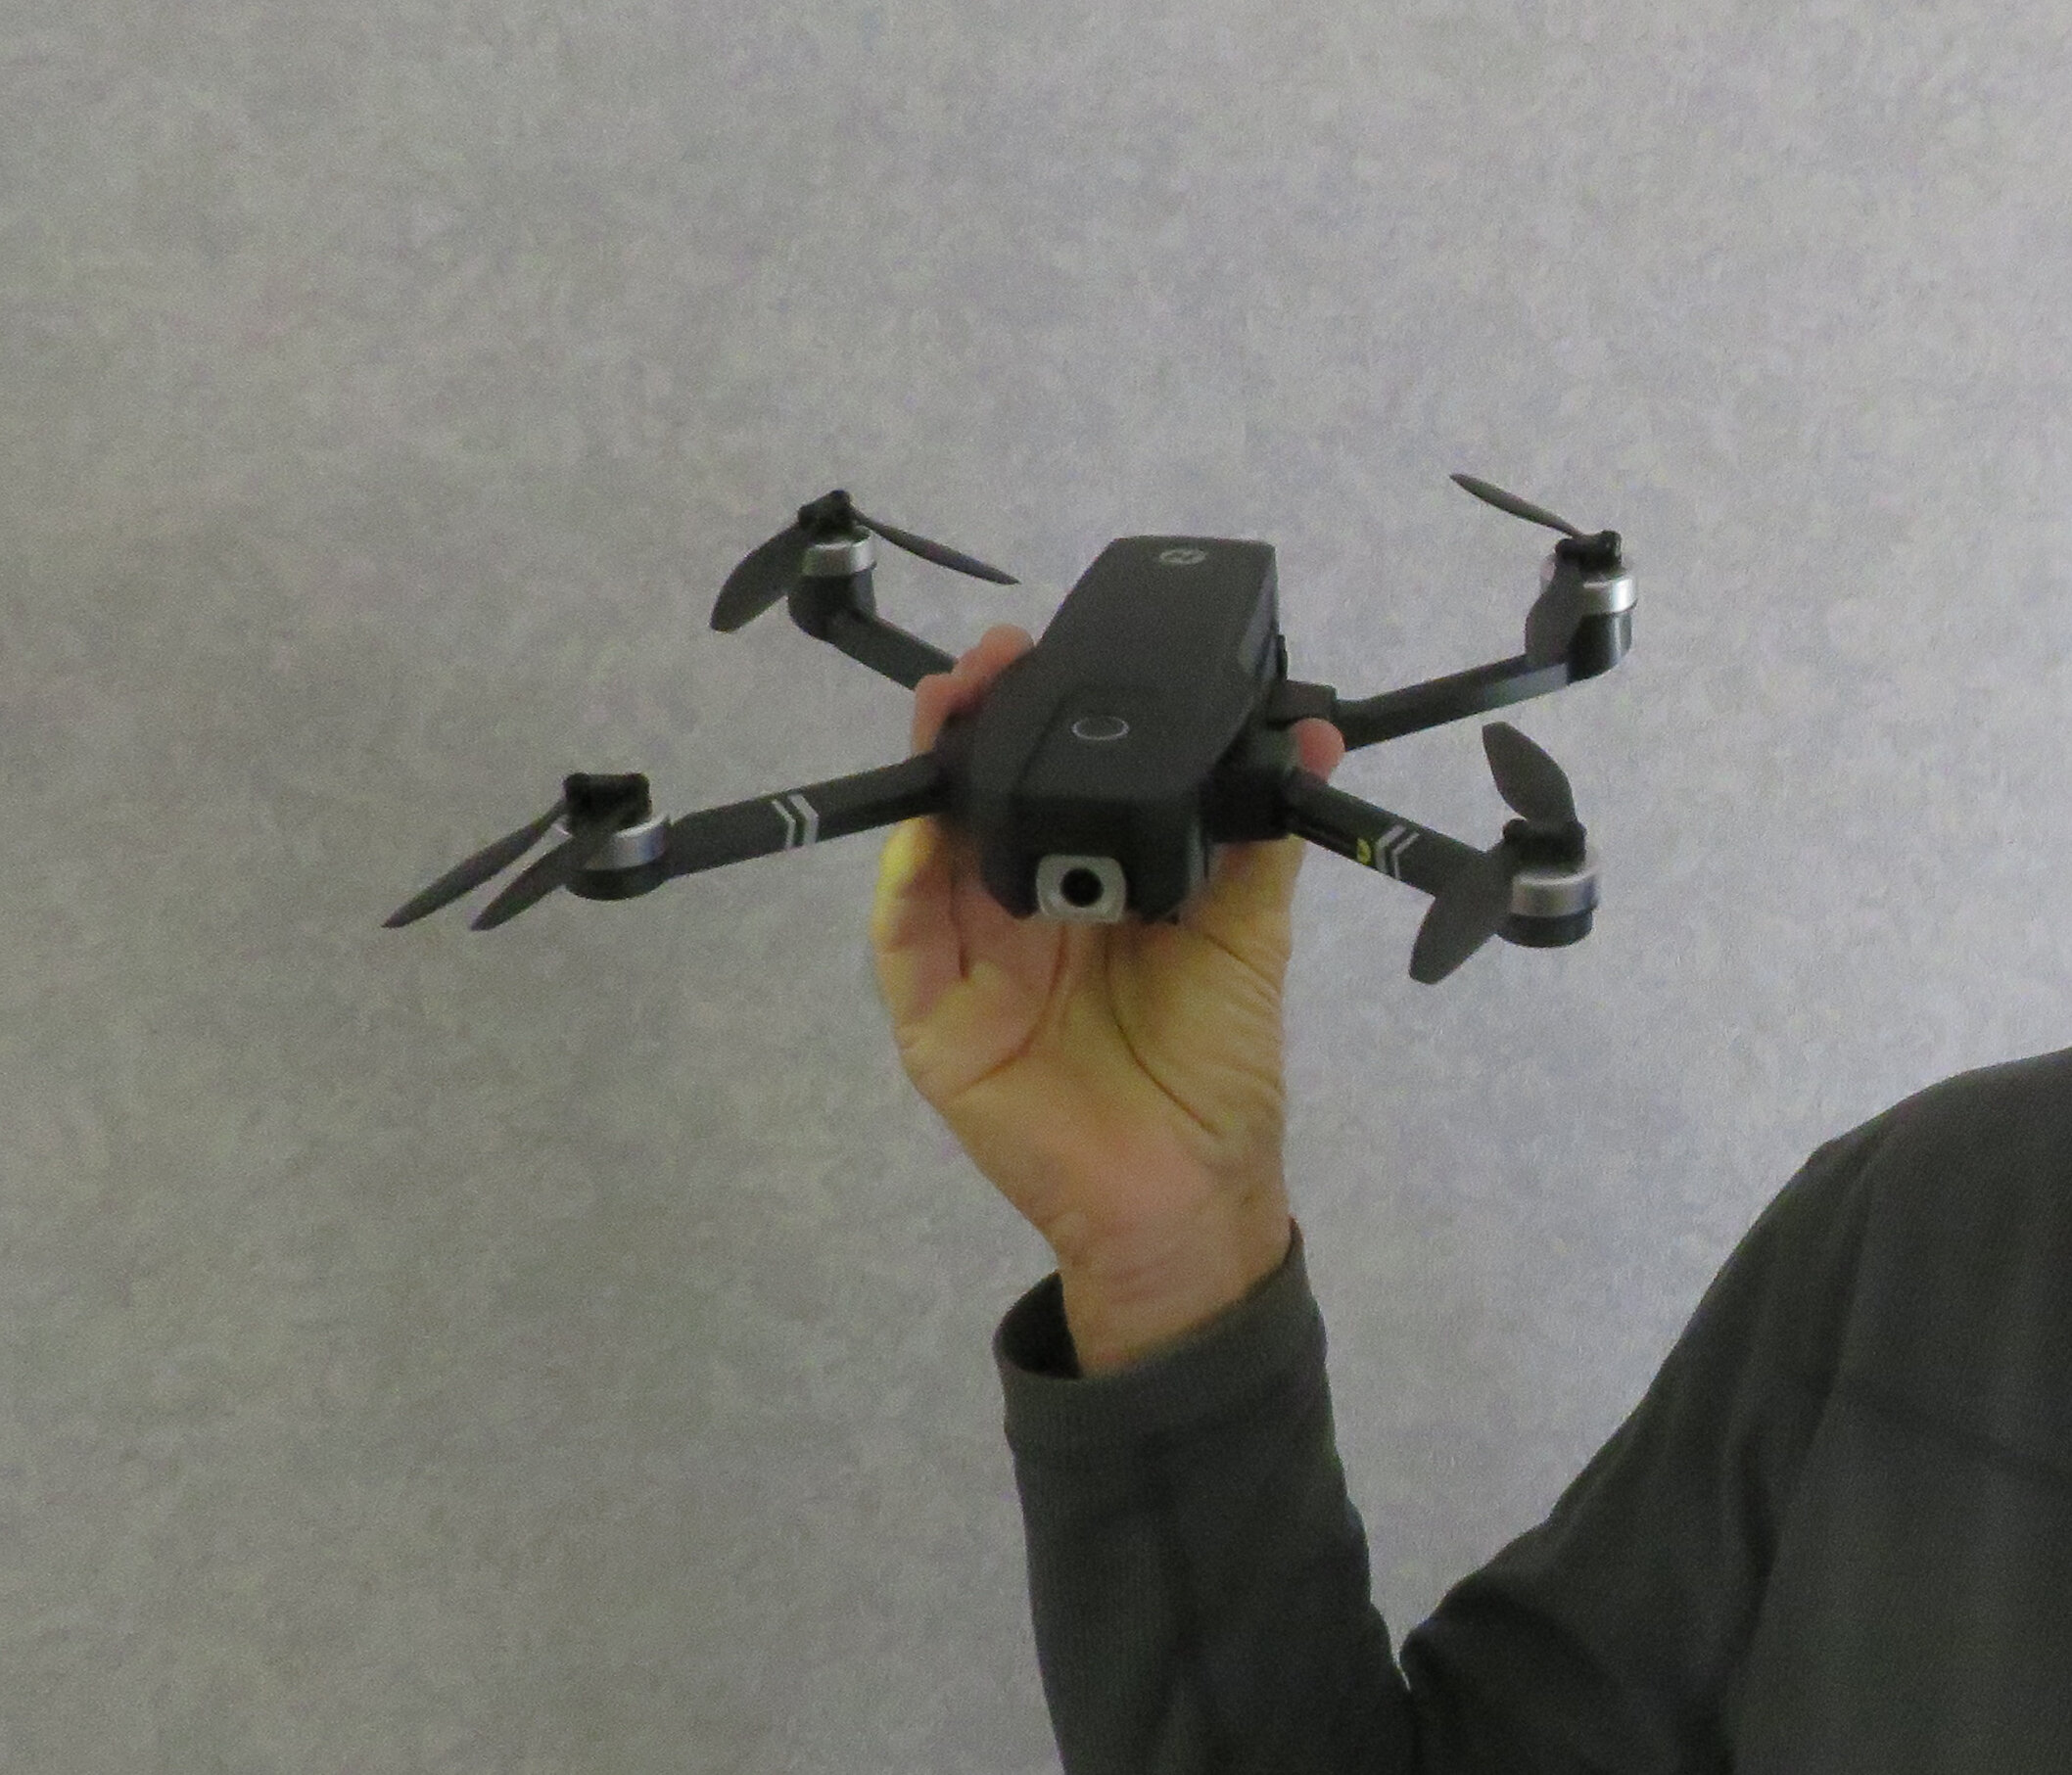 The drone is quite small